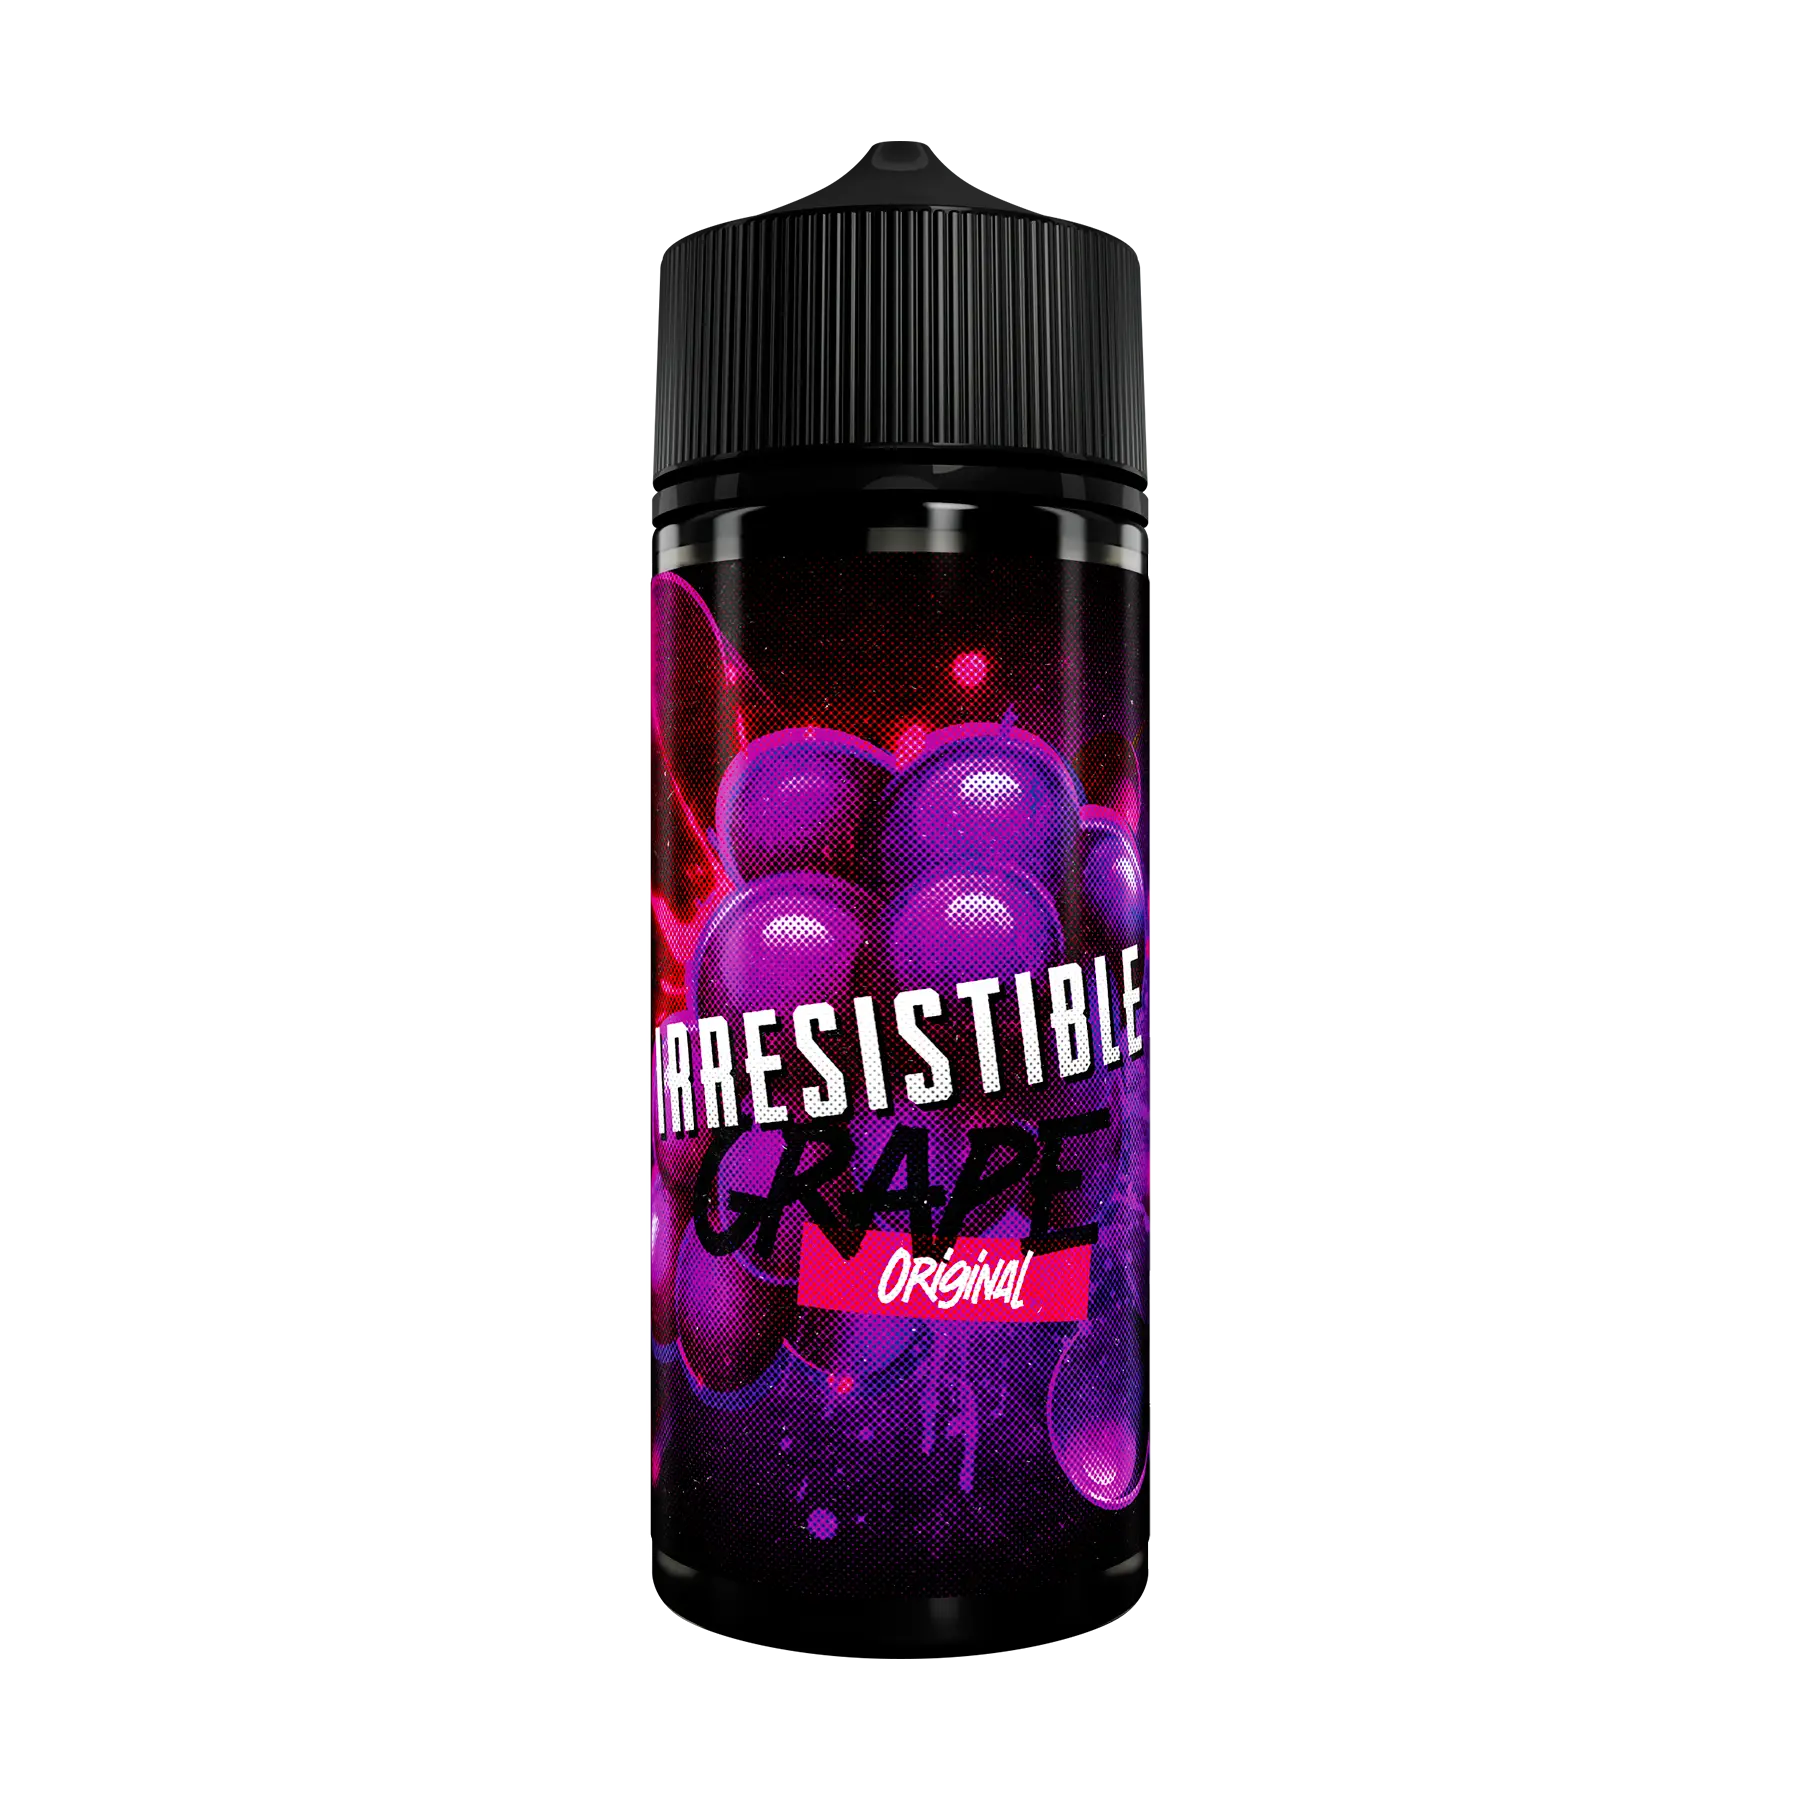 The flavour is a blend of sweet grapes and bold fruitiness. The inhale is bursting with grape flavour, and the exhale is smooth and refreshing. The perfect ADV!